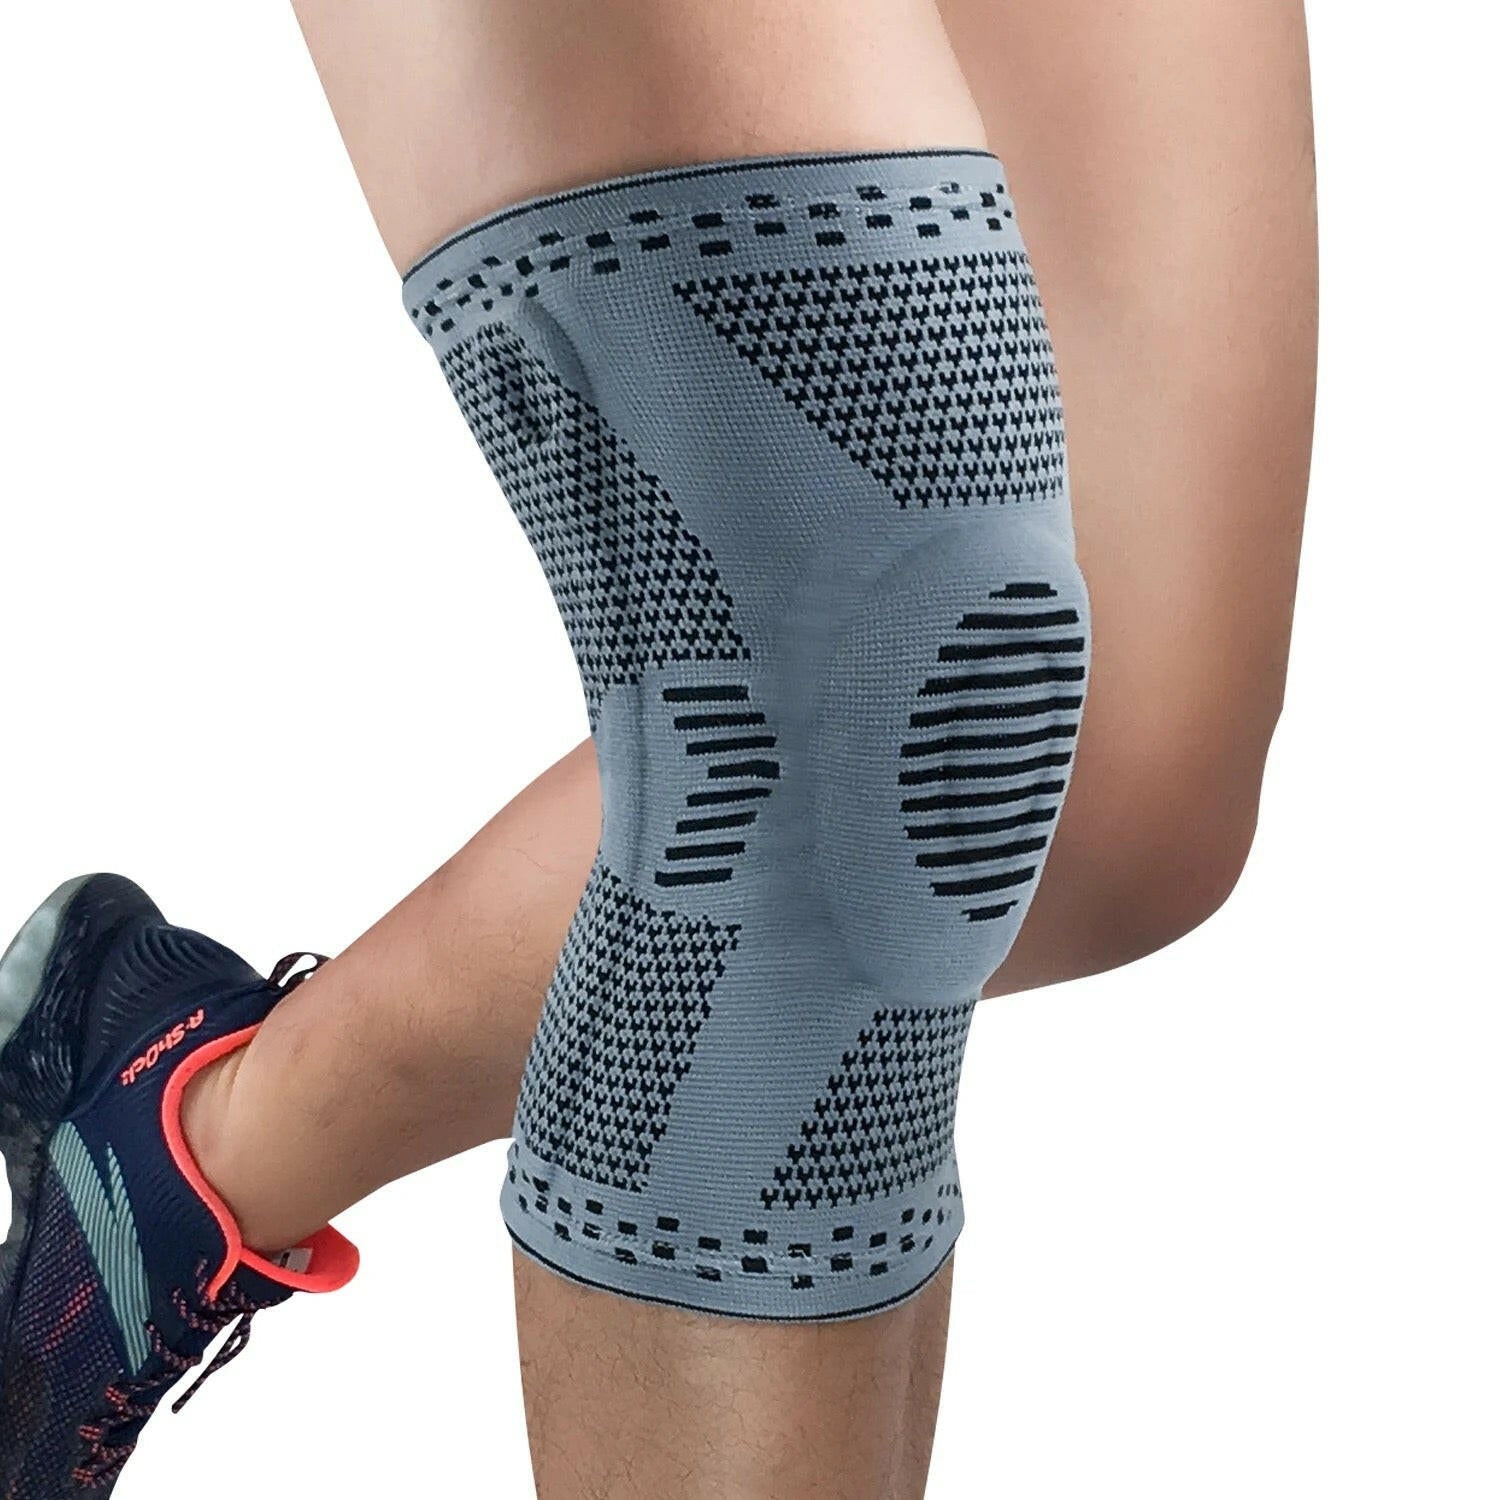 Anti - collision compression knee sleeve - elastic spring support knee wrap for sport